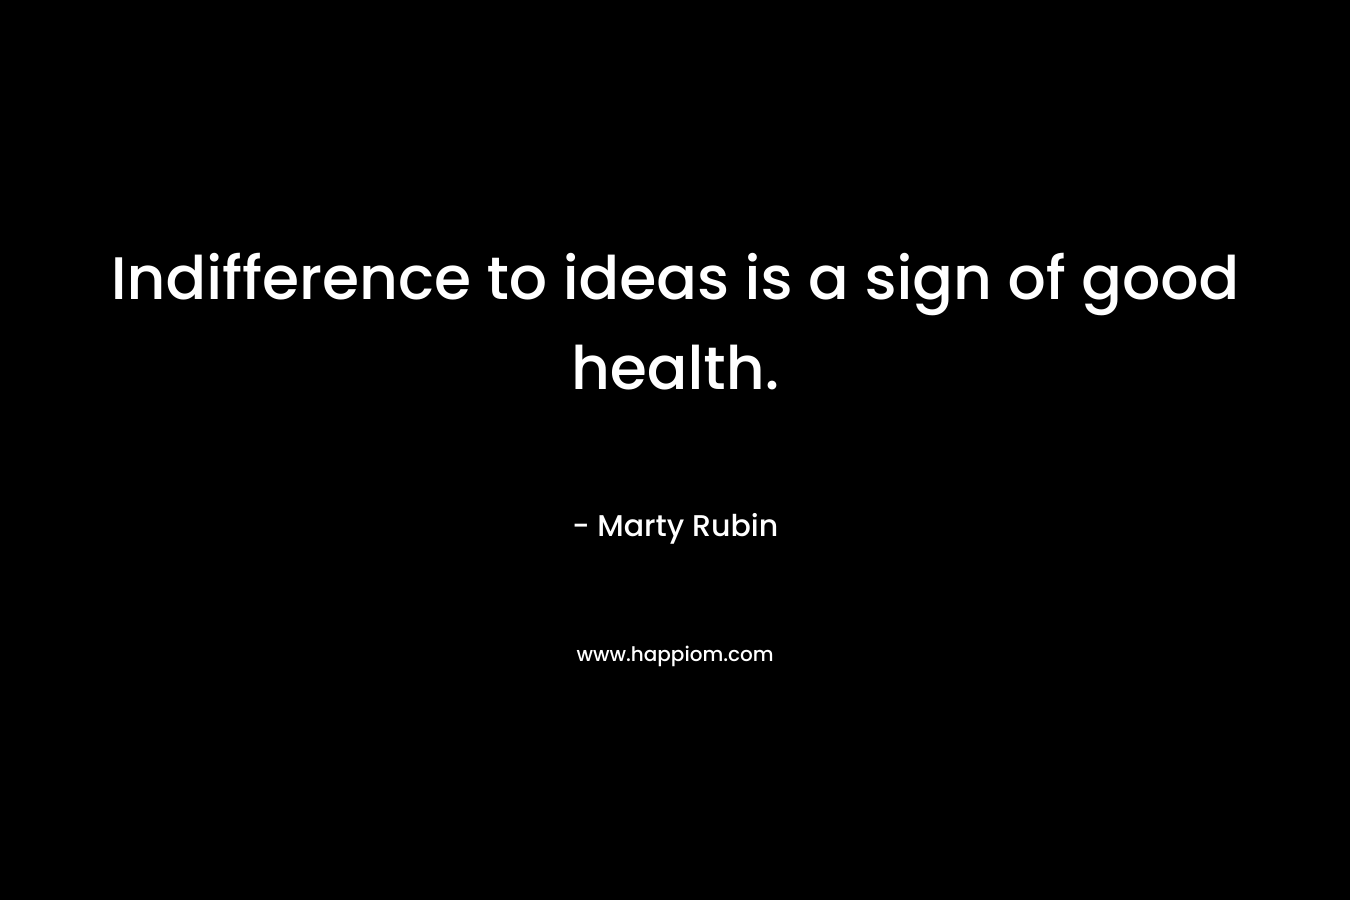 Indifference to ideas is a sign of good health.